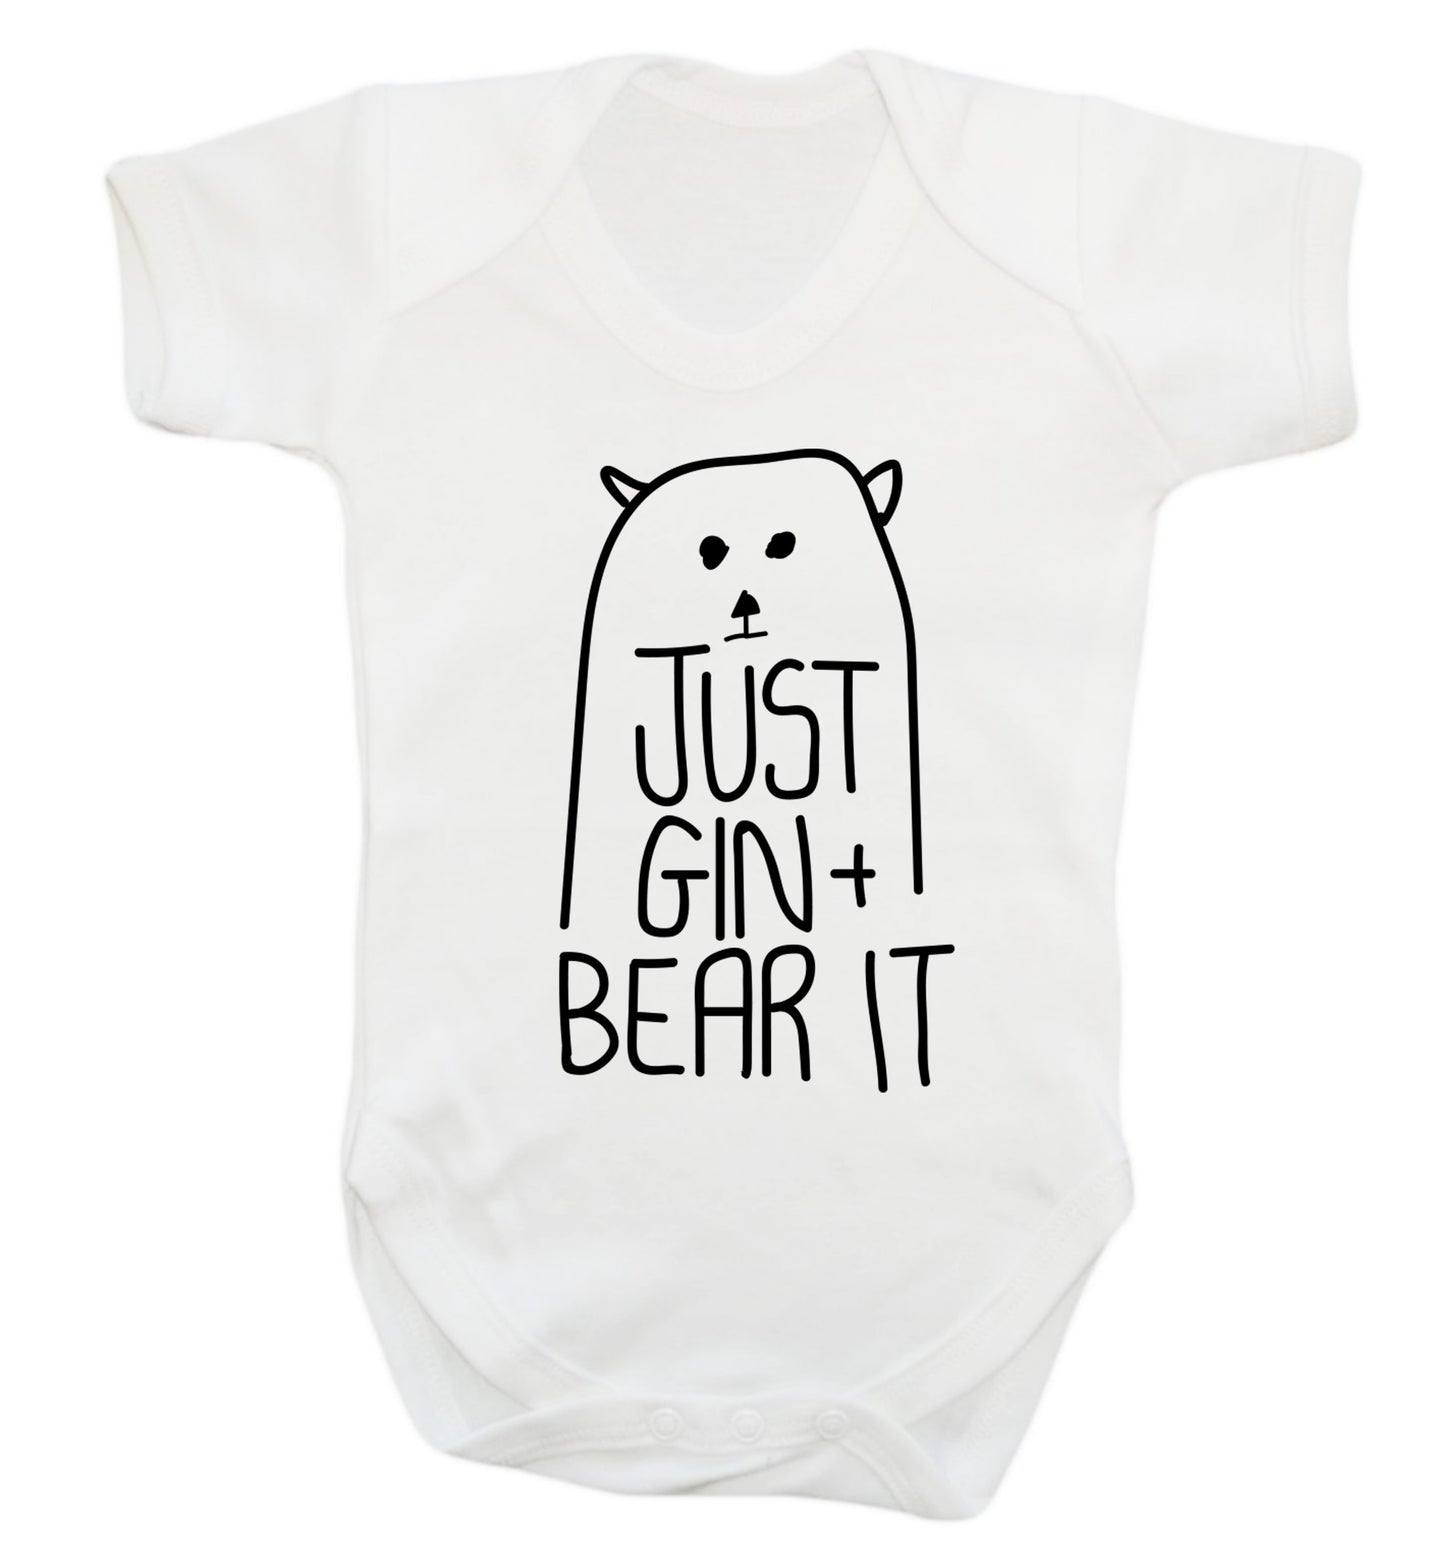 Just gin and bear it Baby Vest white 18-24 months